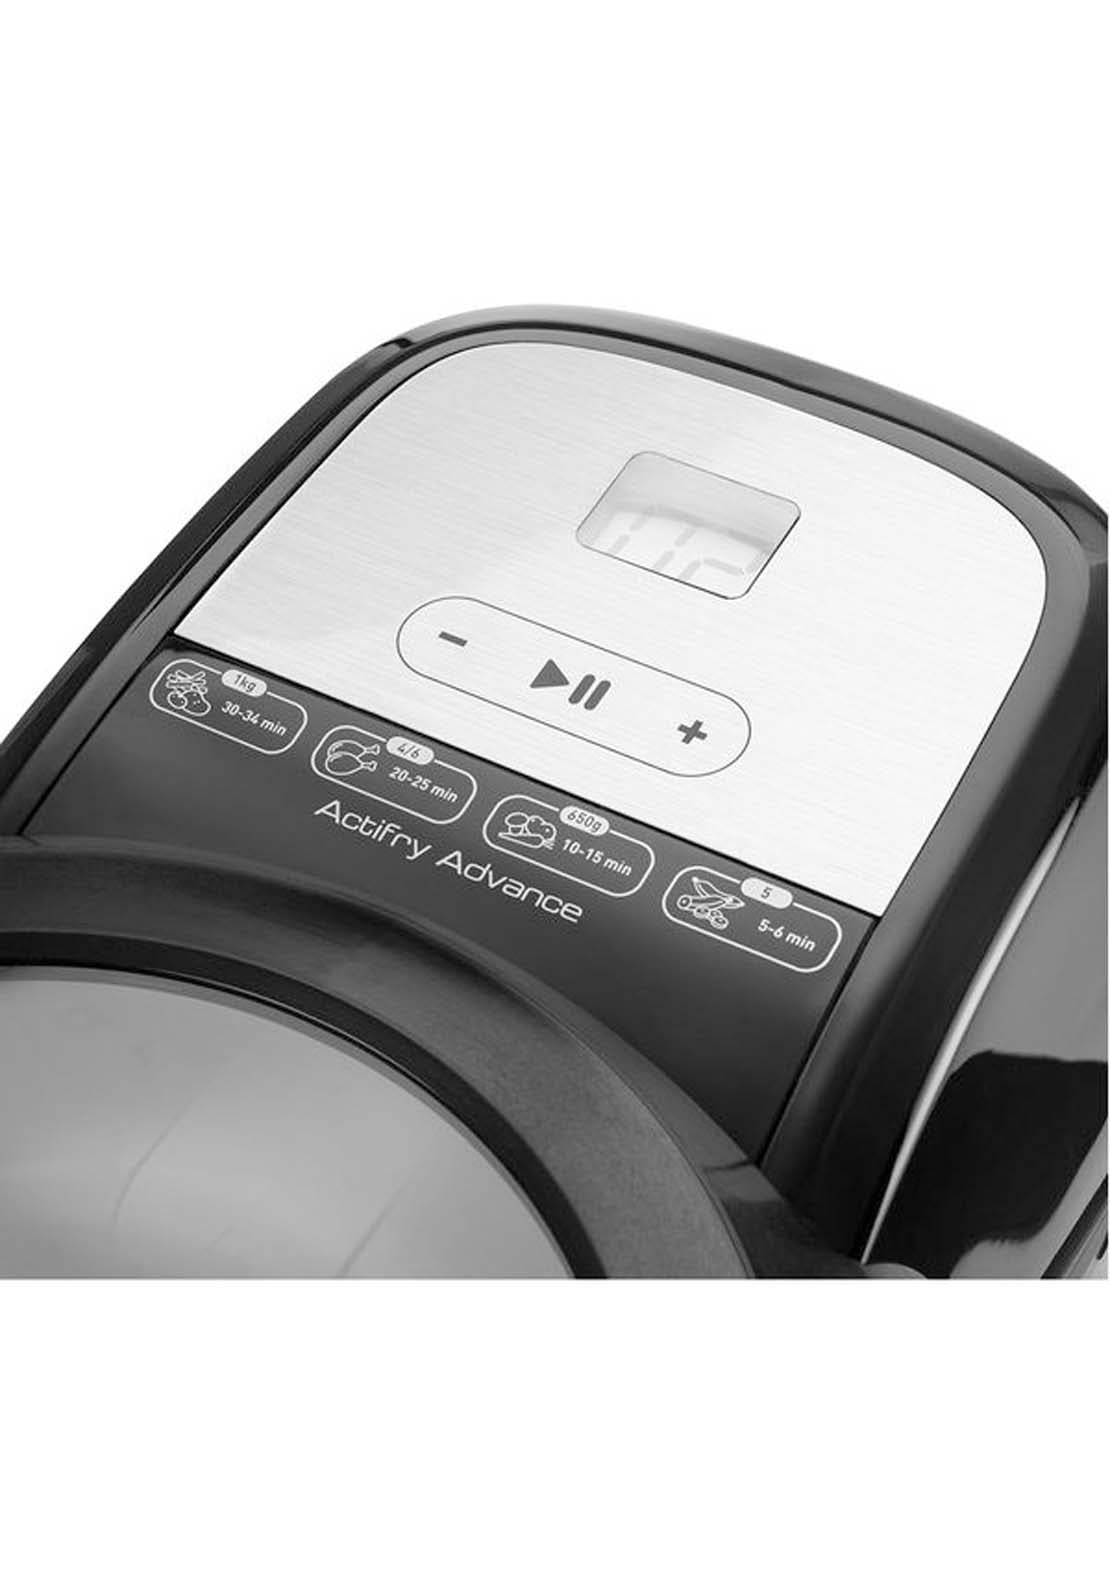 Tefal Tefal Advanced Actifry 1.2 4 Shaws Department Stores